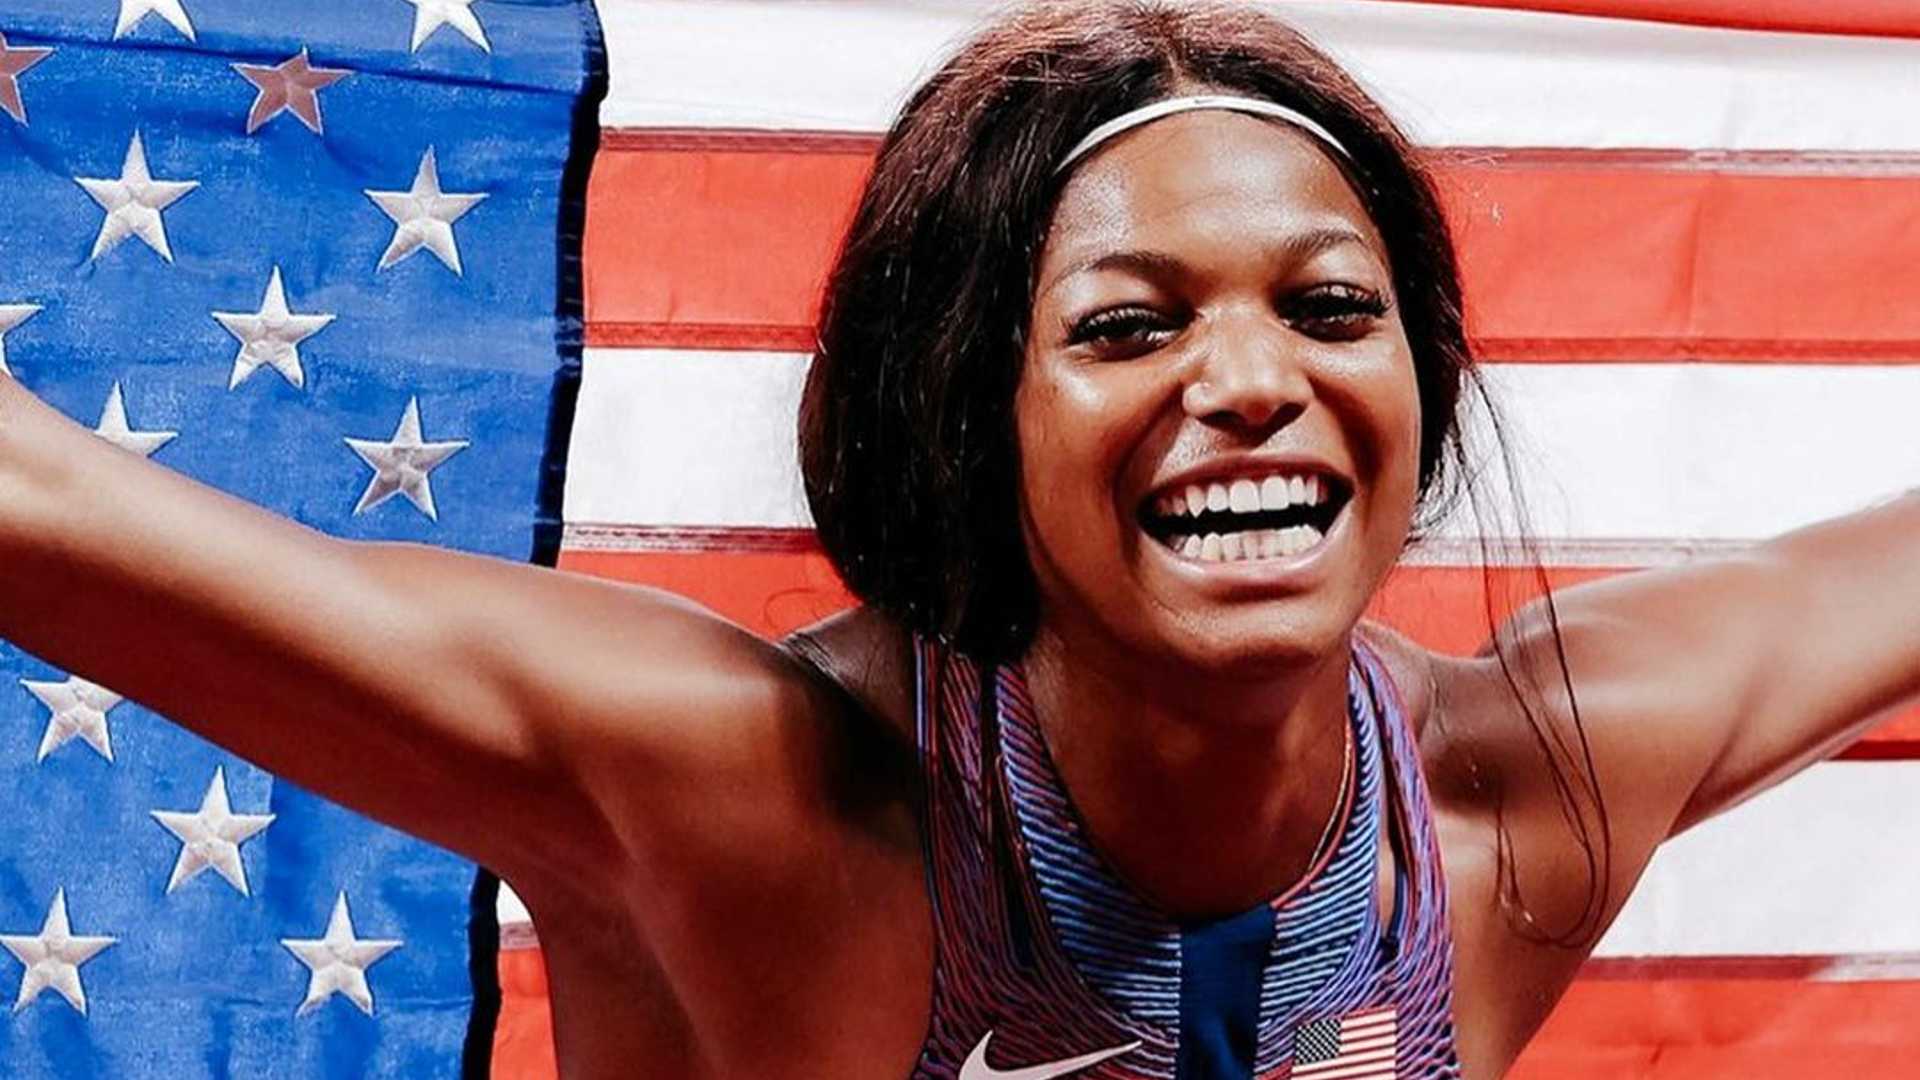 Gabrielle after winning the bronze medal for the USA at Tokyo Olympics 2020 (Image Credits - Instagram/ @gabbythomas)